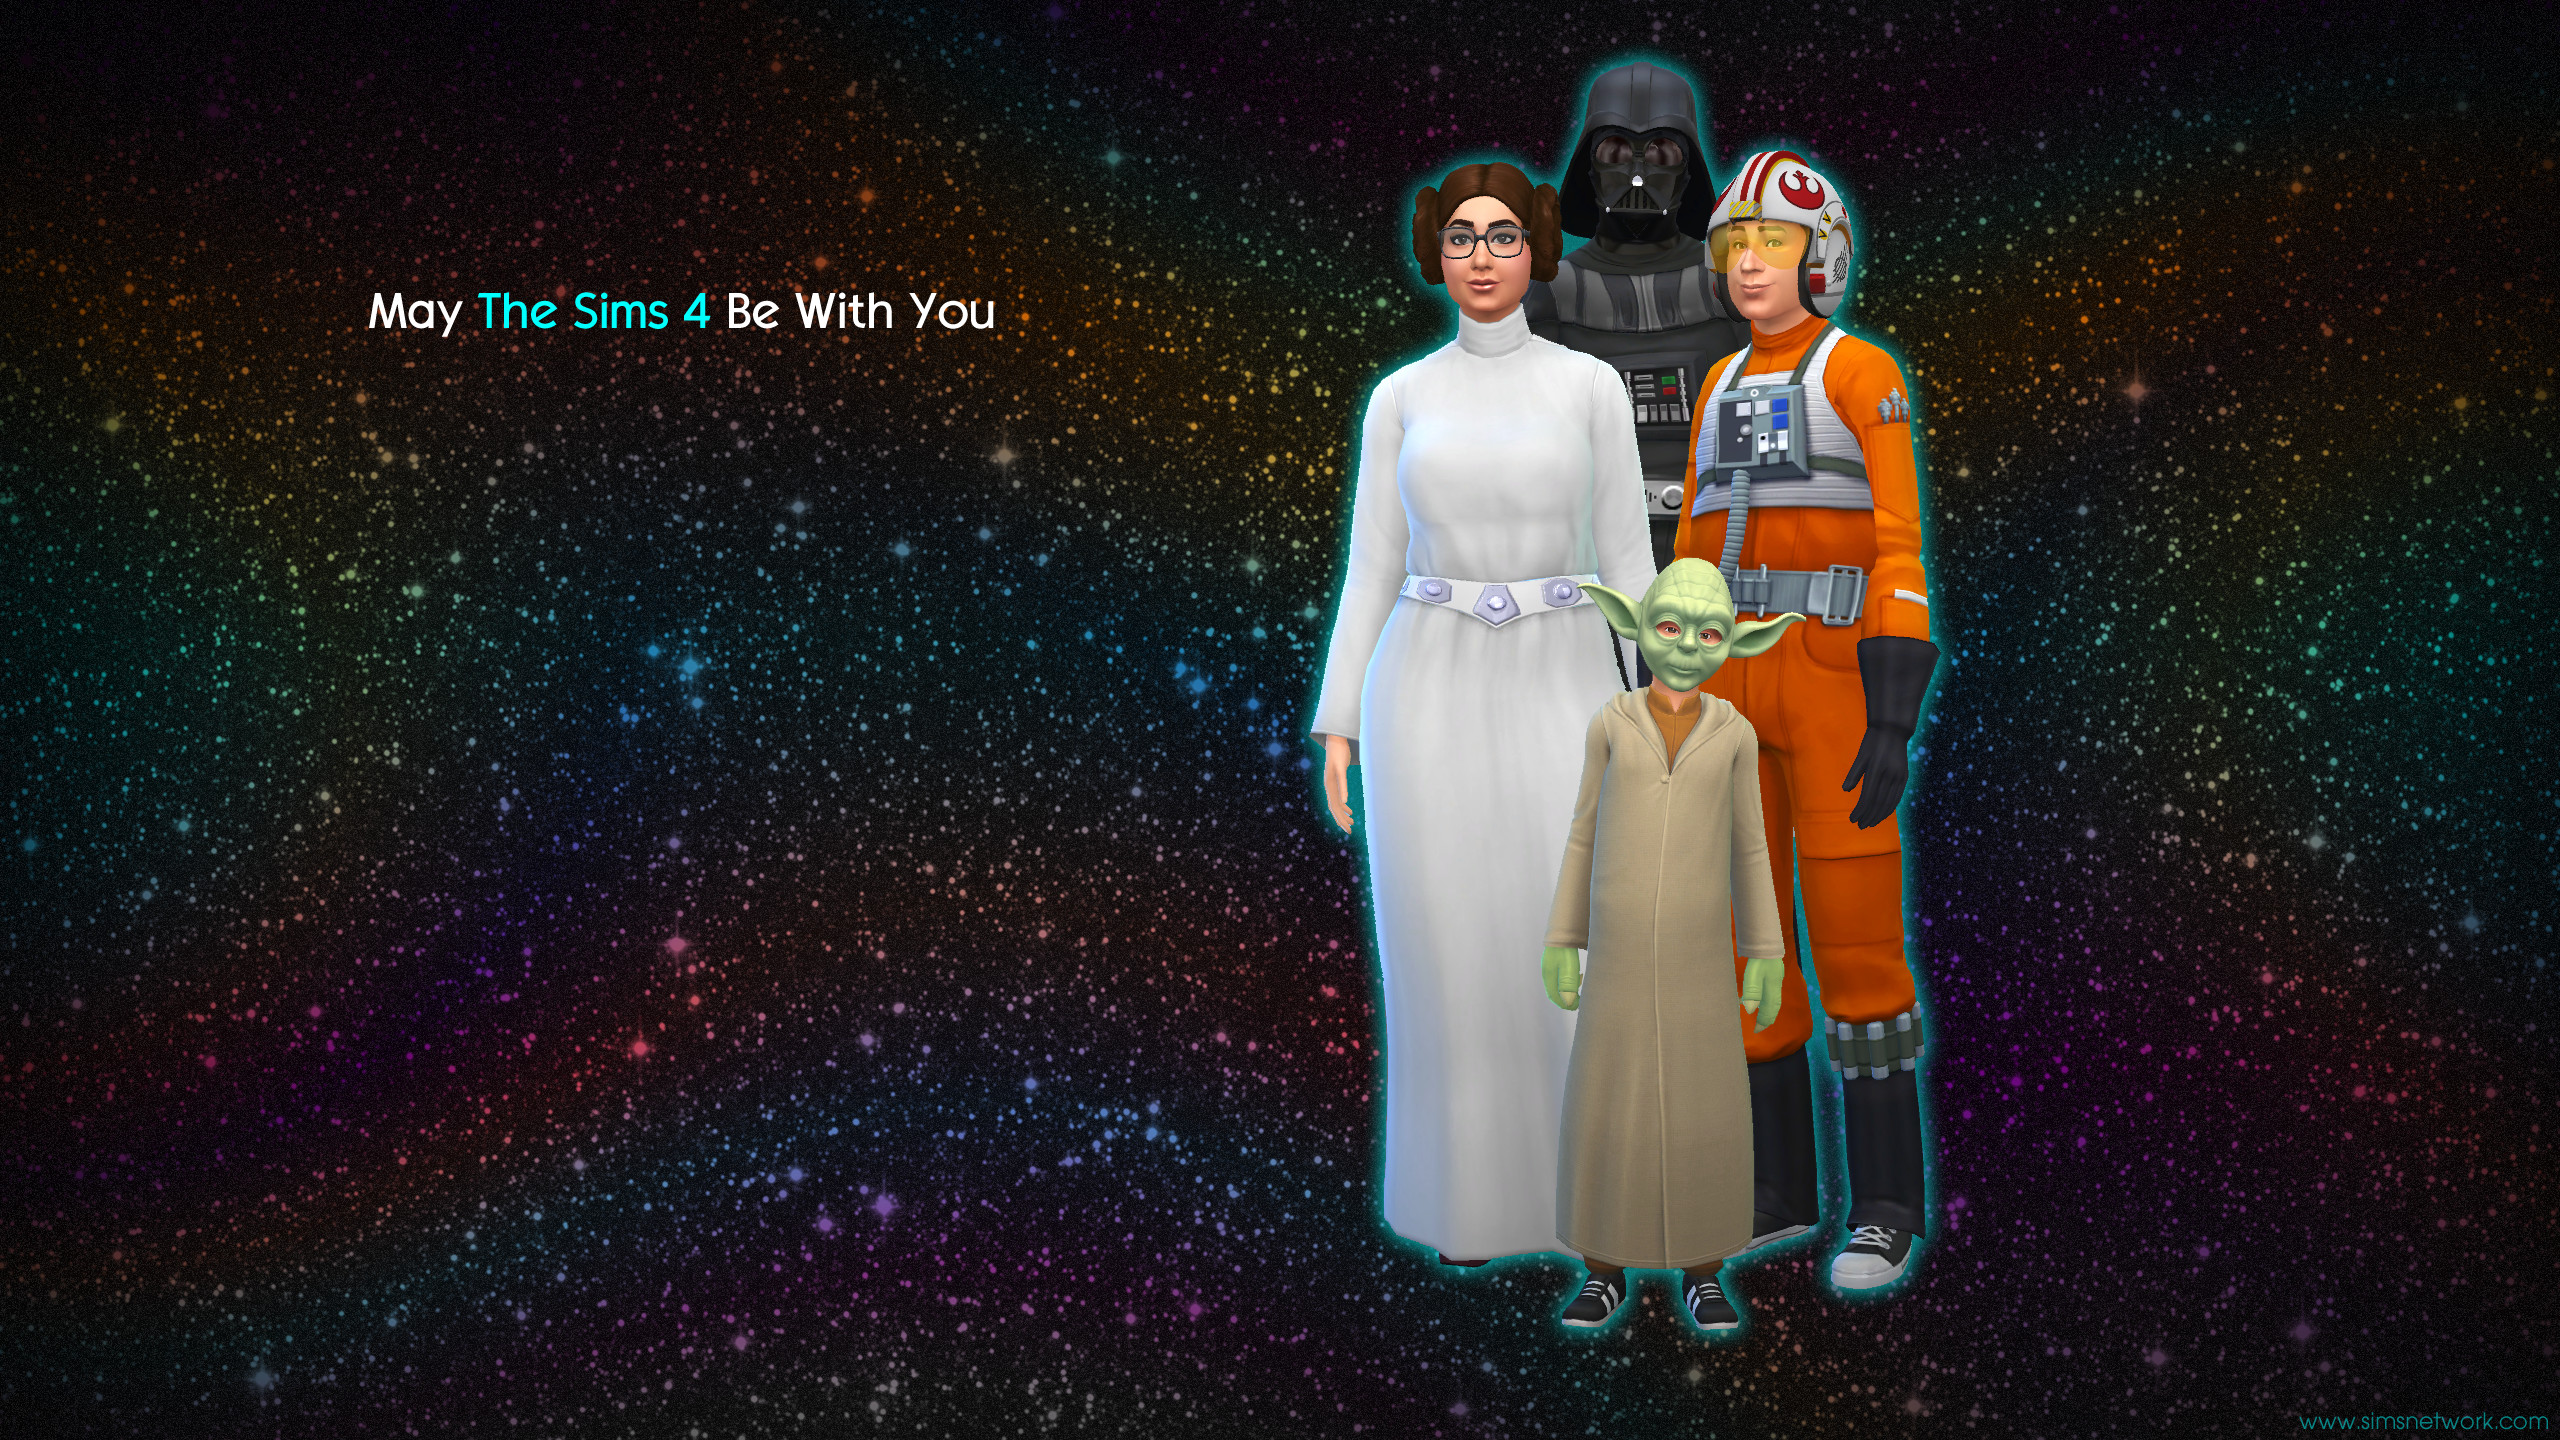 2560x1440 Wallpapers: May The Sims 4 Be With You wallpapers